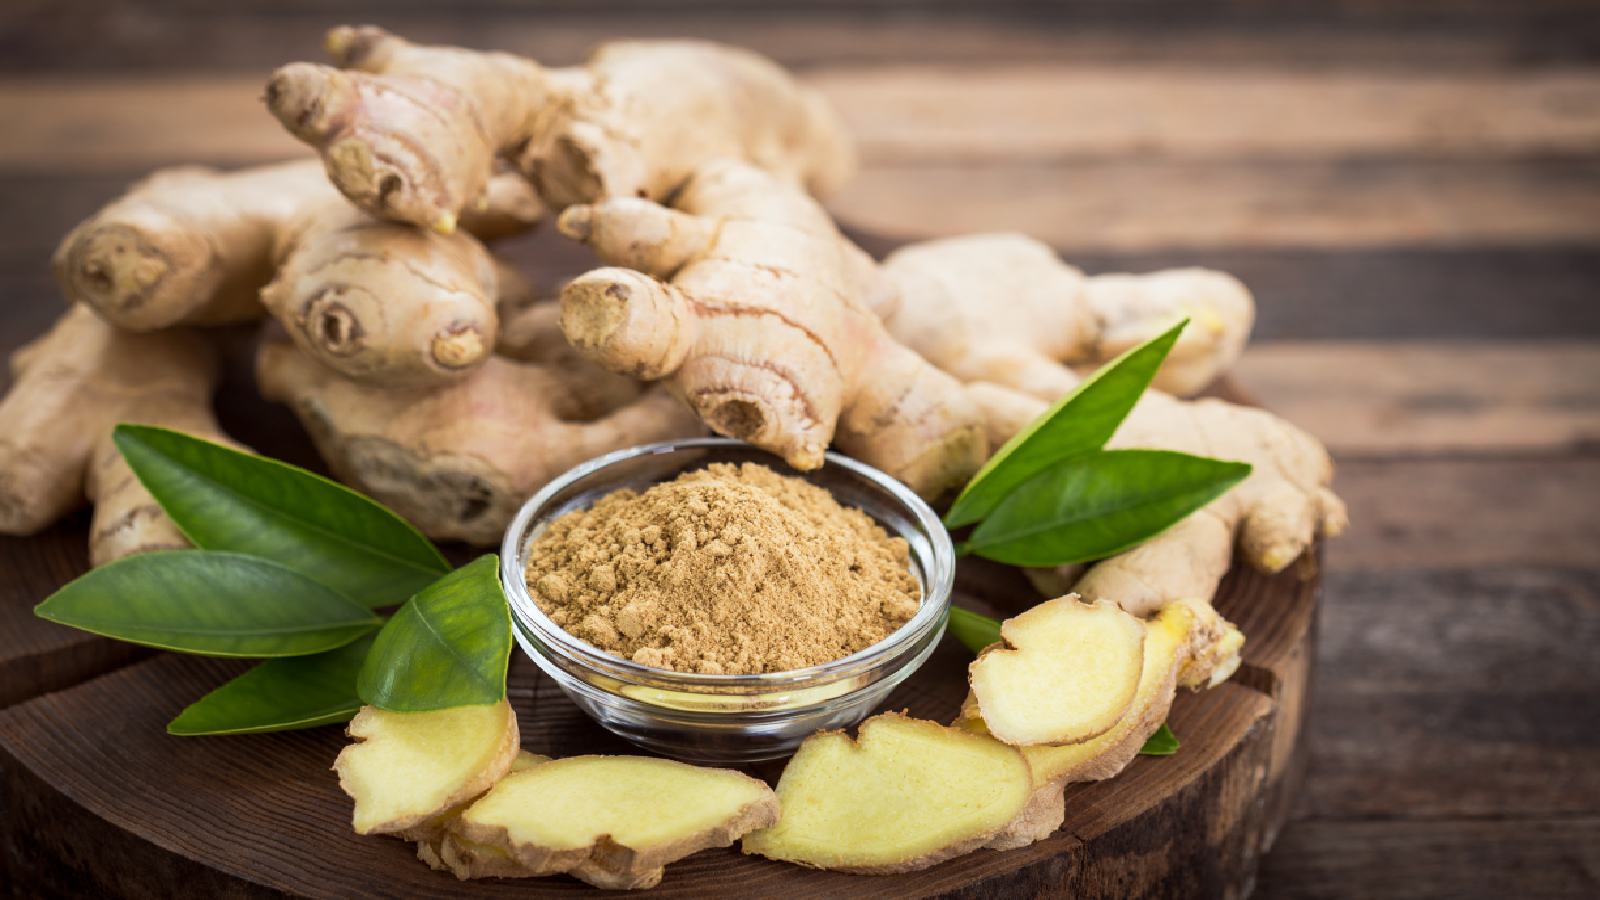 Ginger for hair growth: Benefits and uses